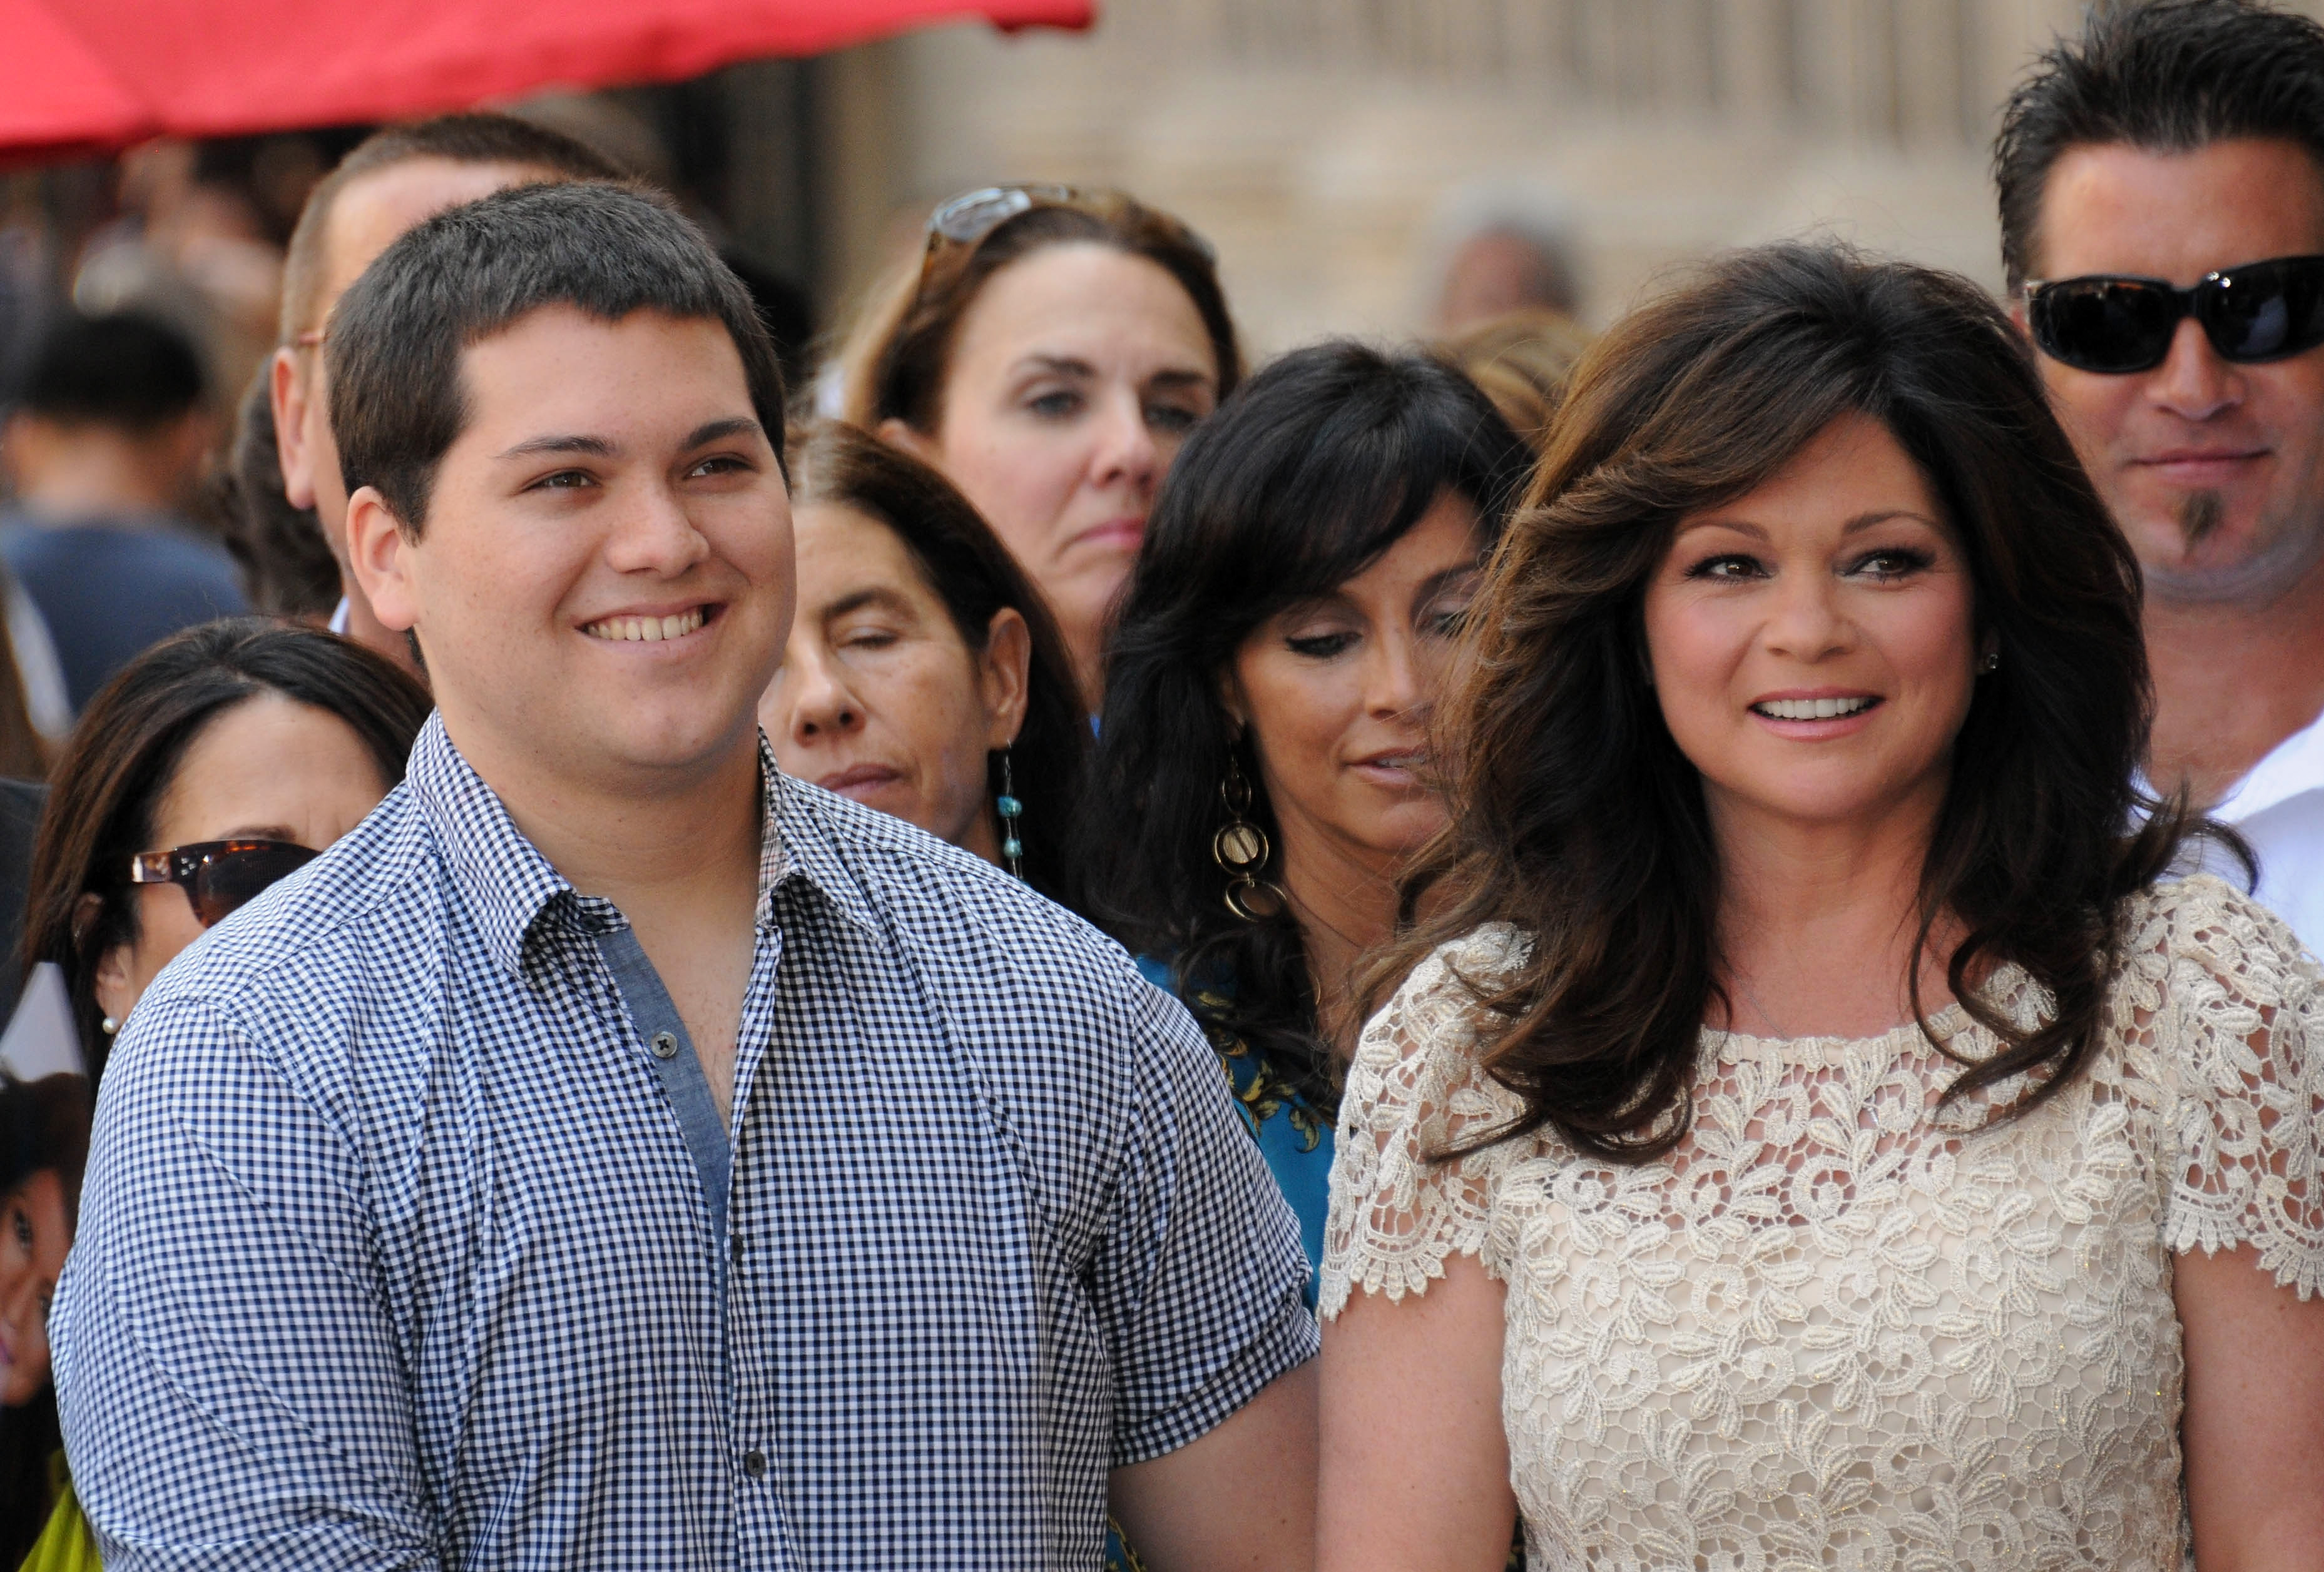 Valerie Bertinelli (right) and her son, Wolfgang Van Halen, in 2012